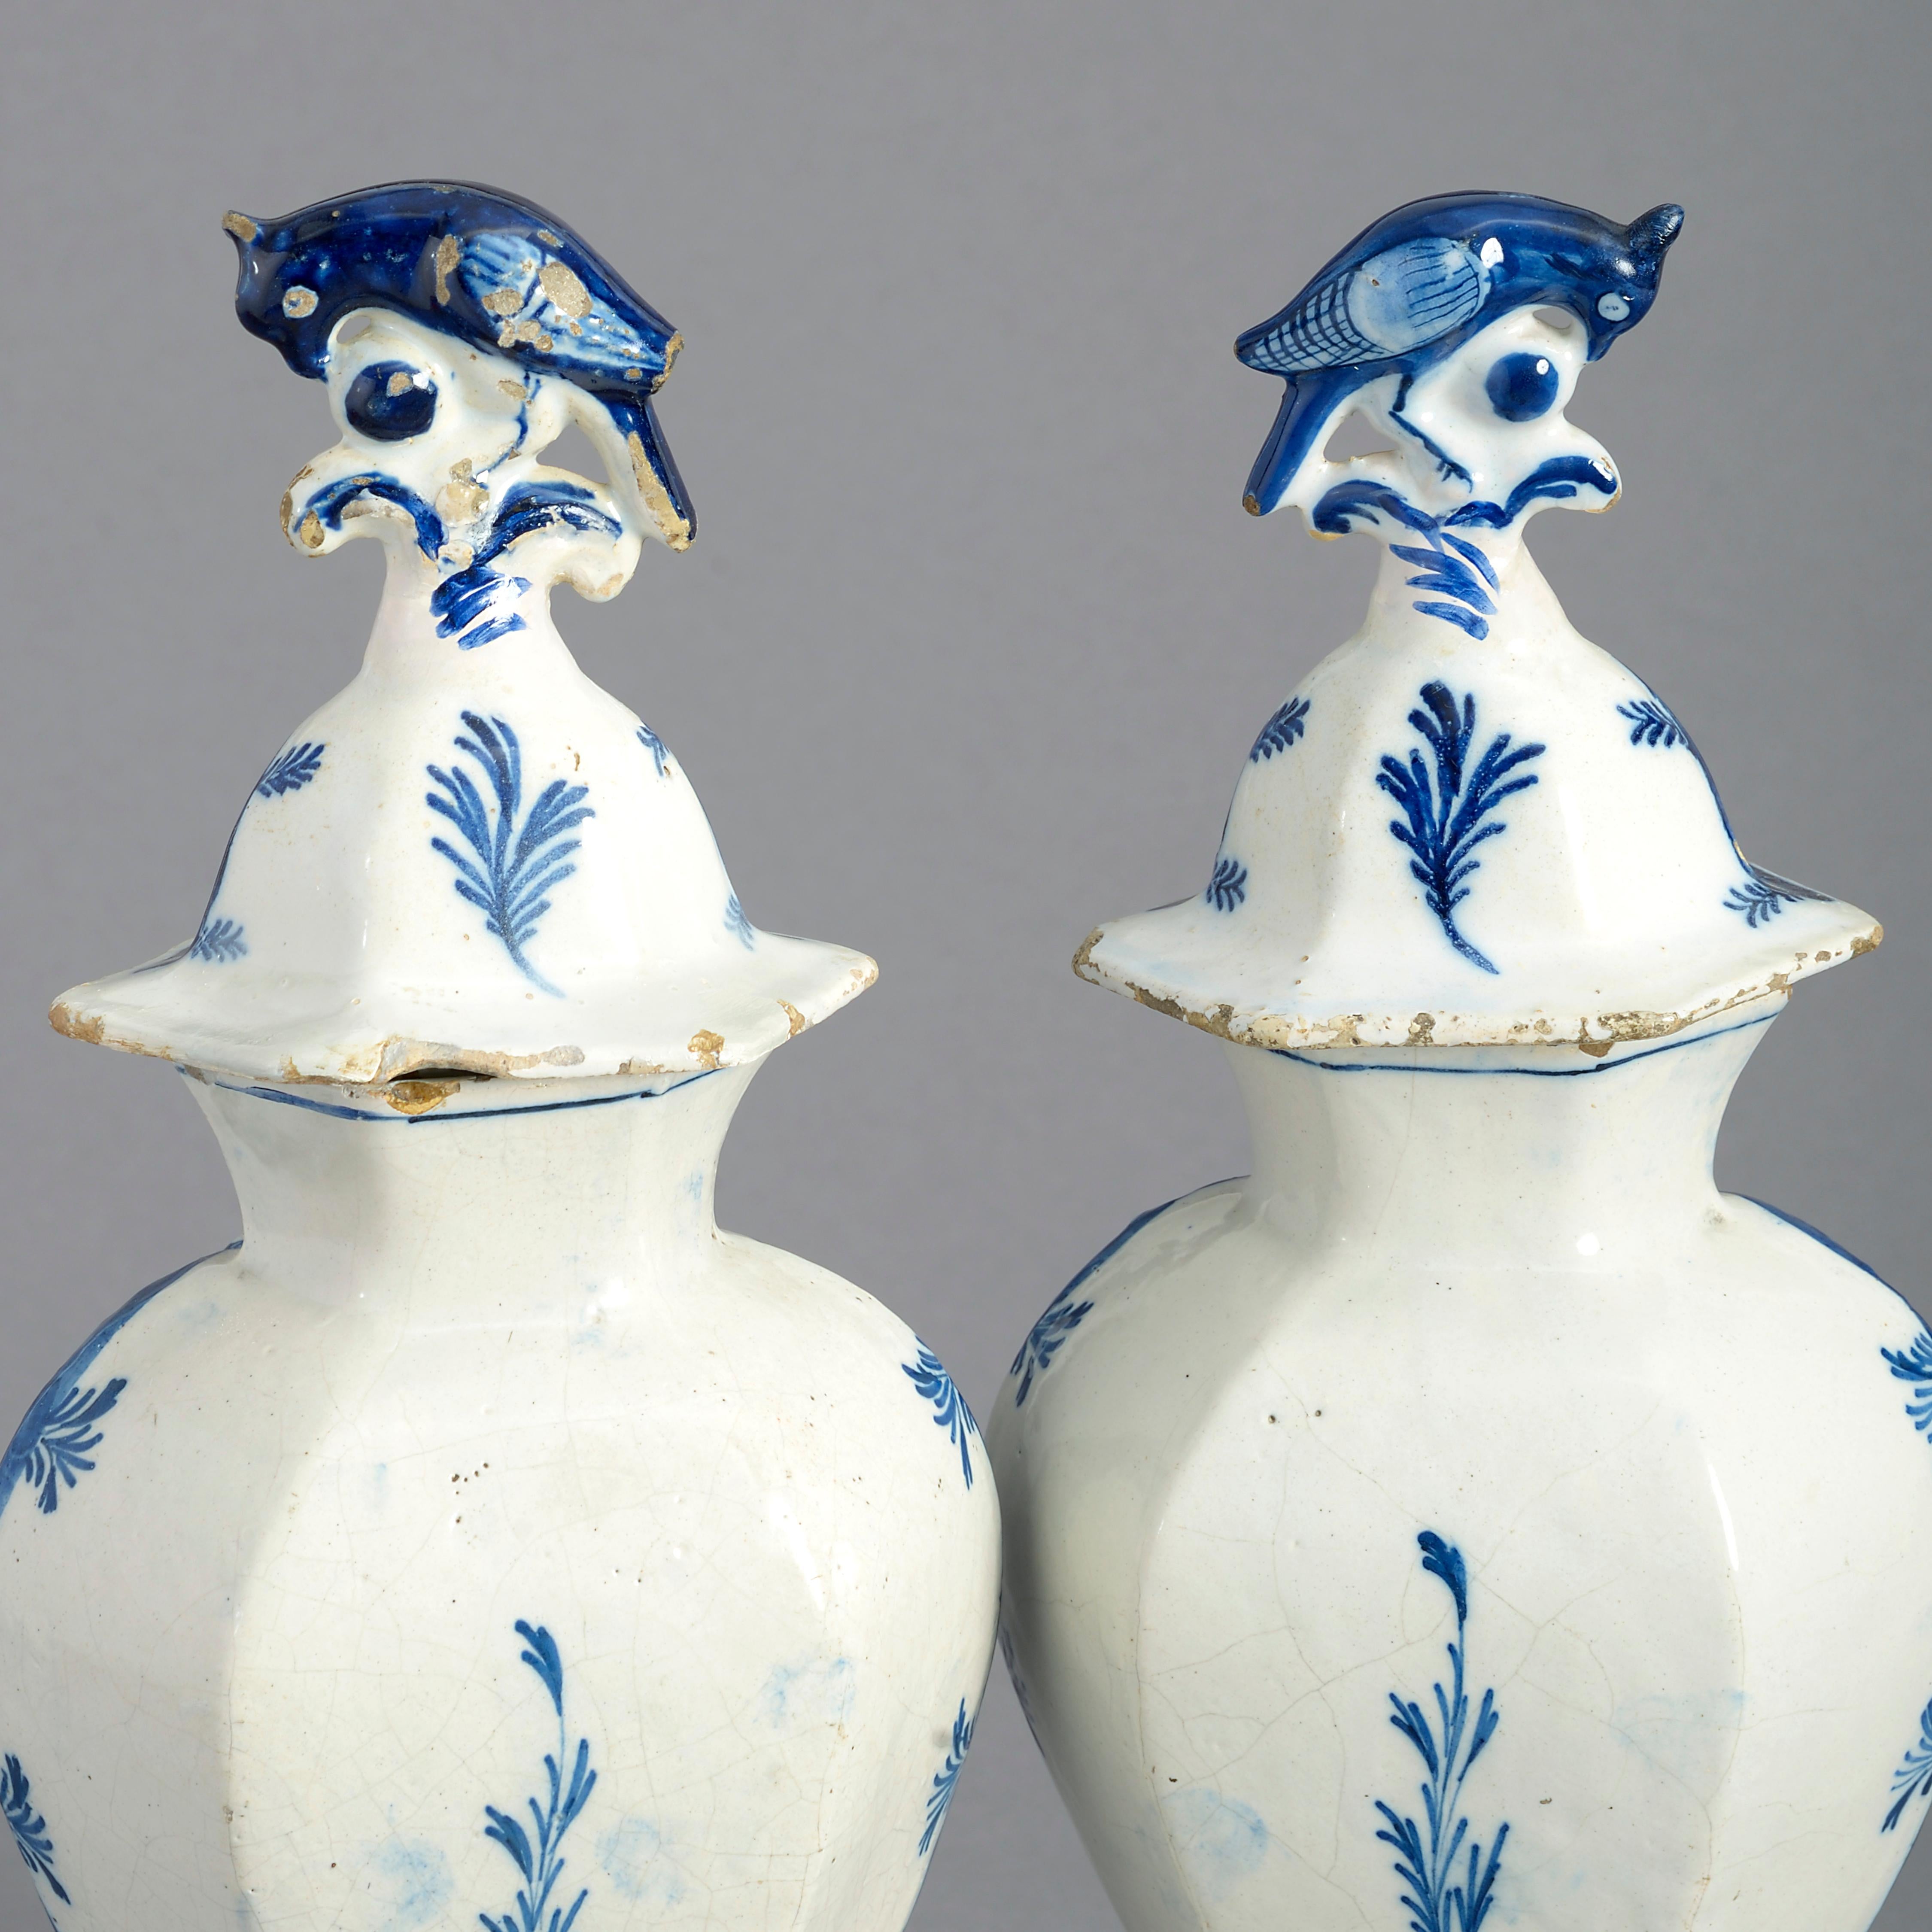 Dutch Pair of 18th Century Blue and White Delft Vases